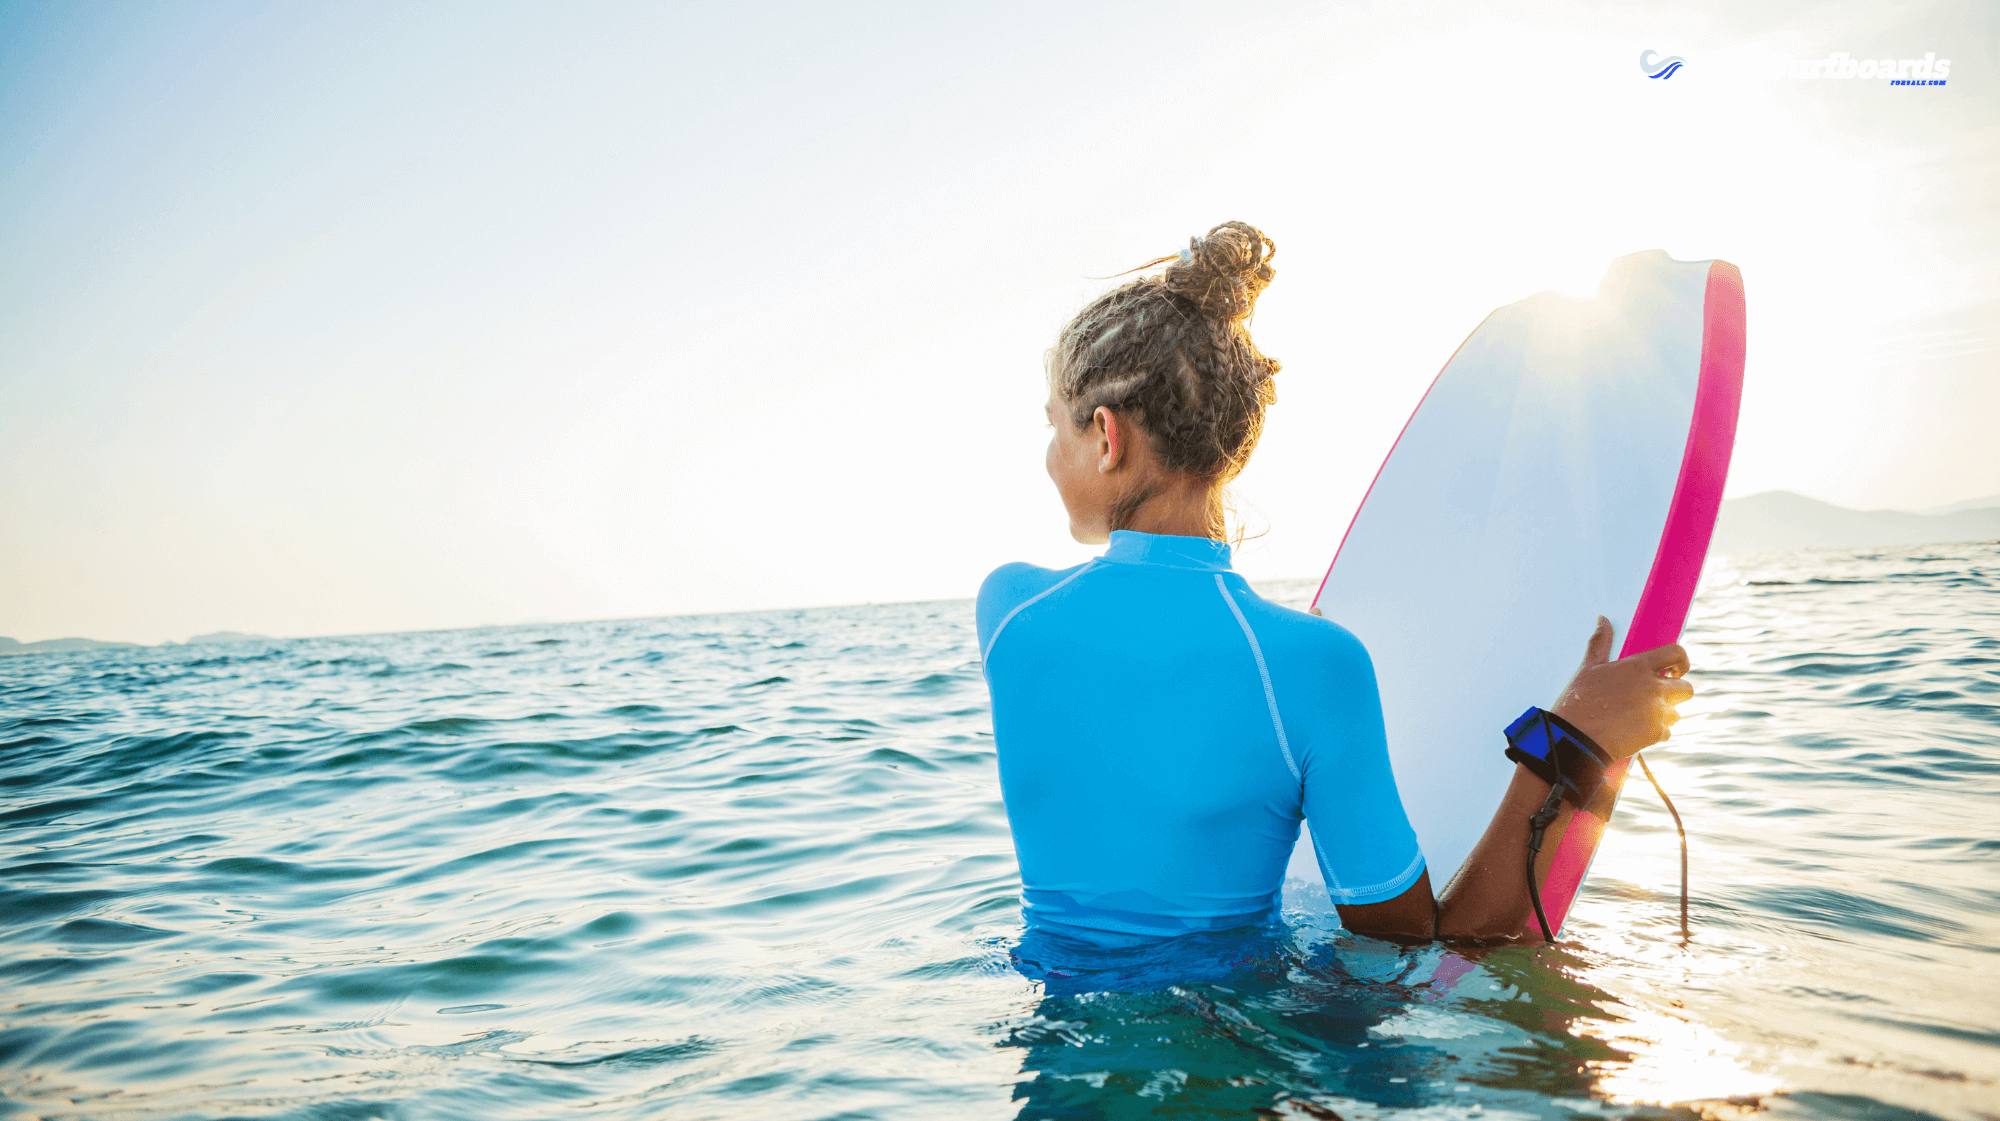 How Hard is Surfing? A Beginner's Perspective